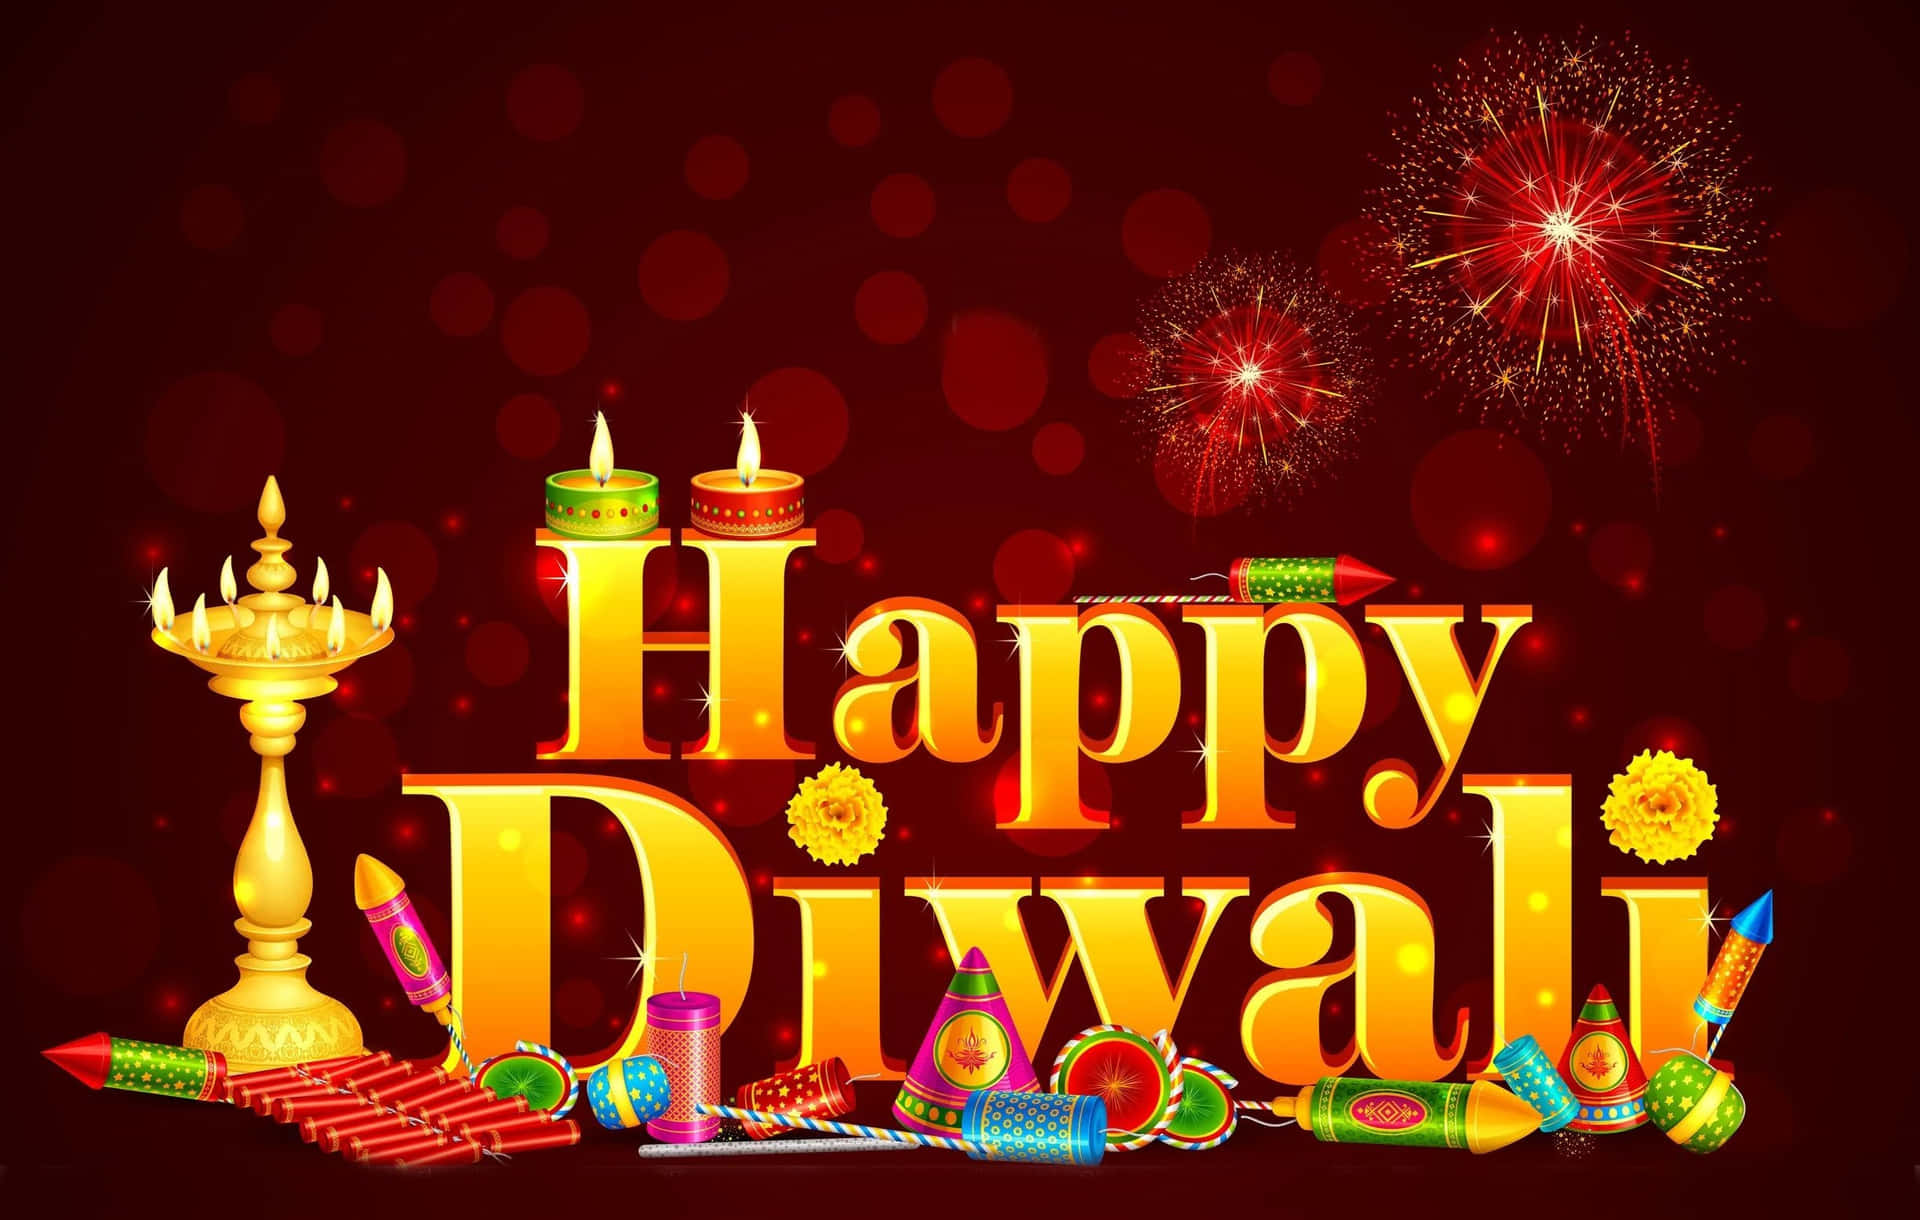 Happy Diwali Greetings With Fireworks And Candles